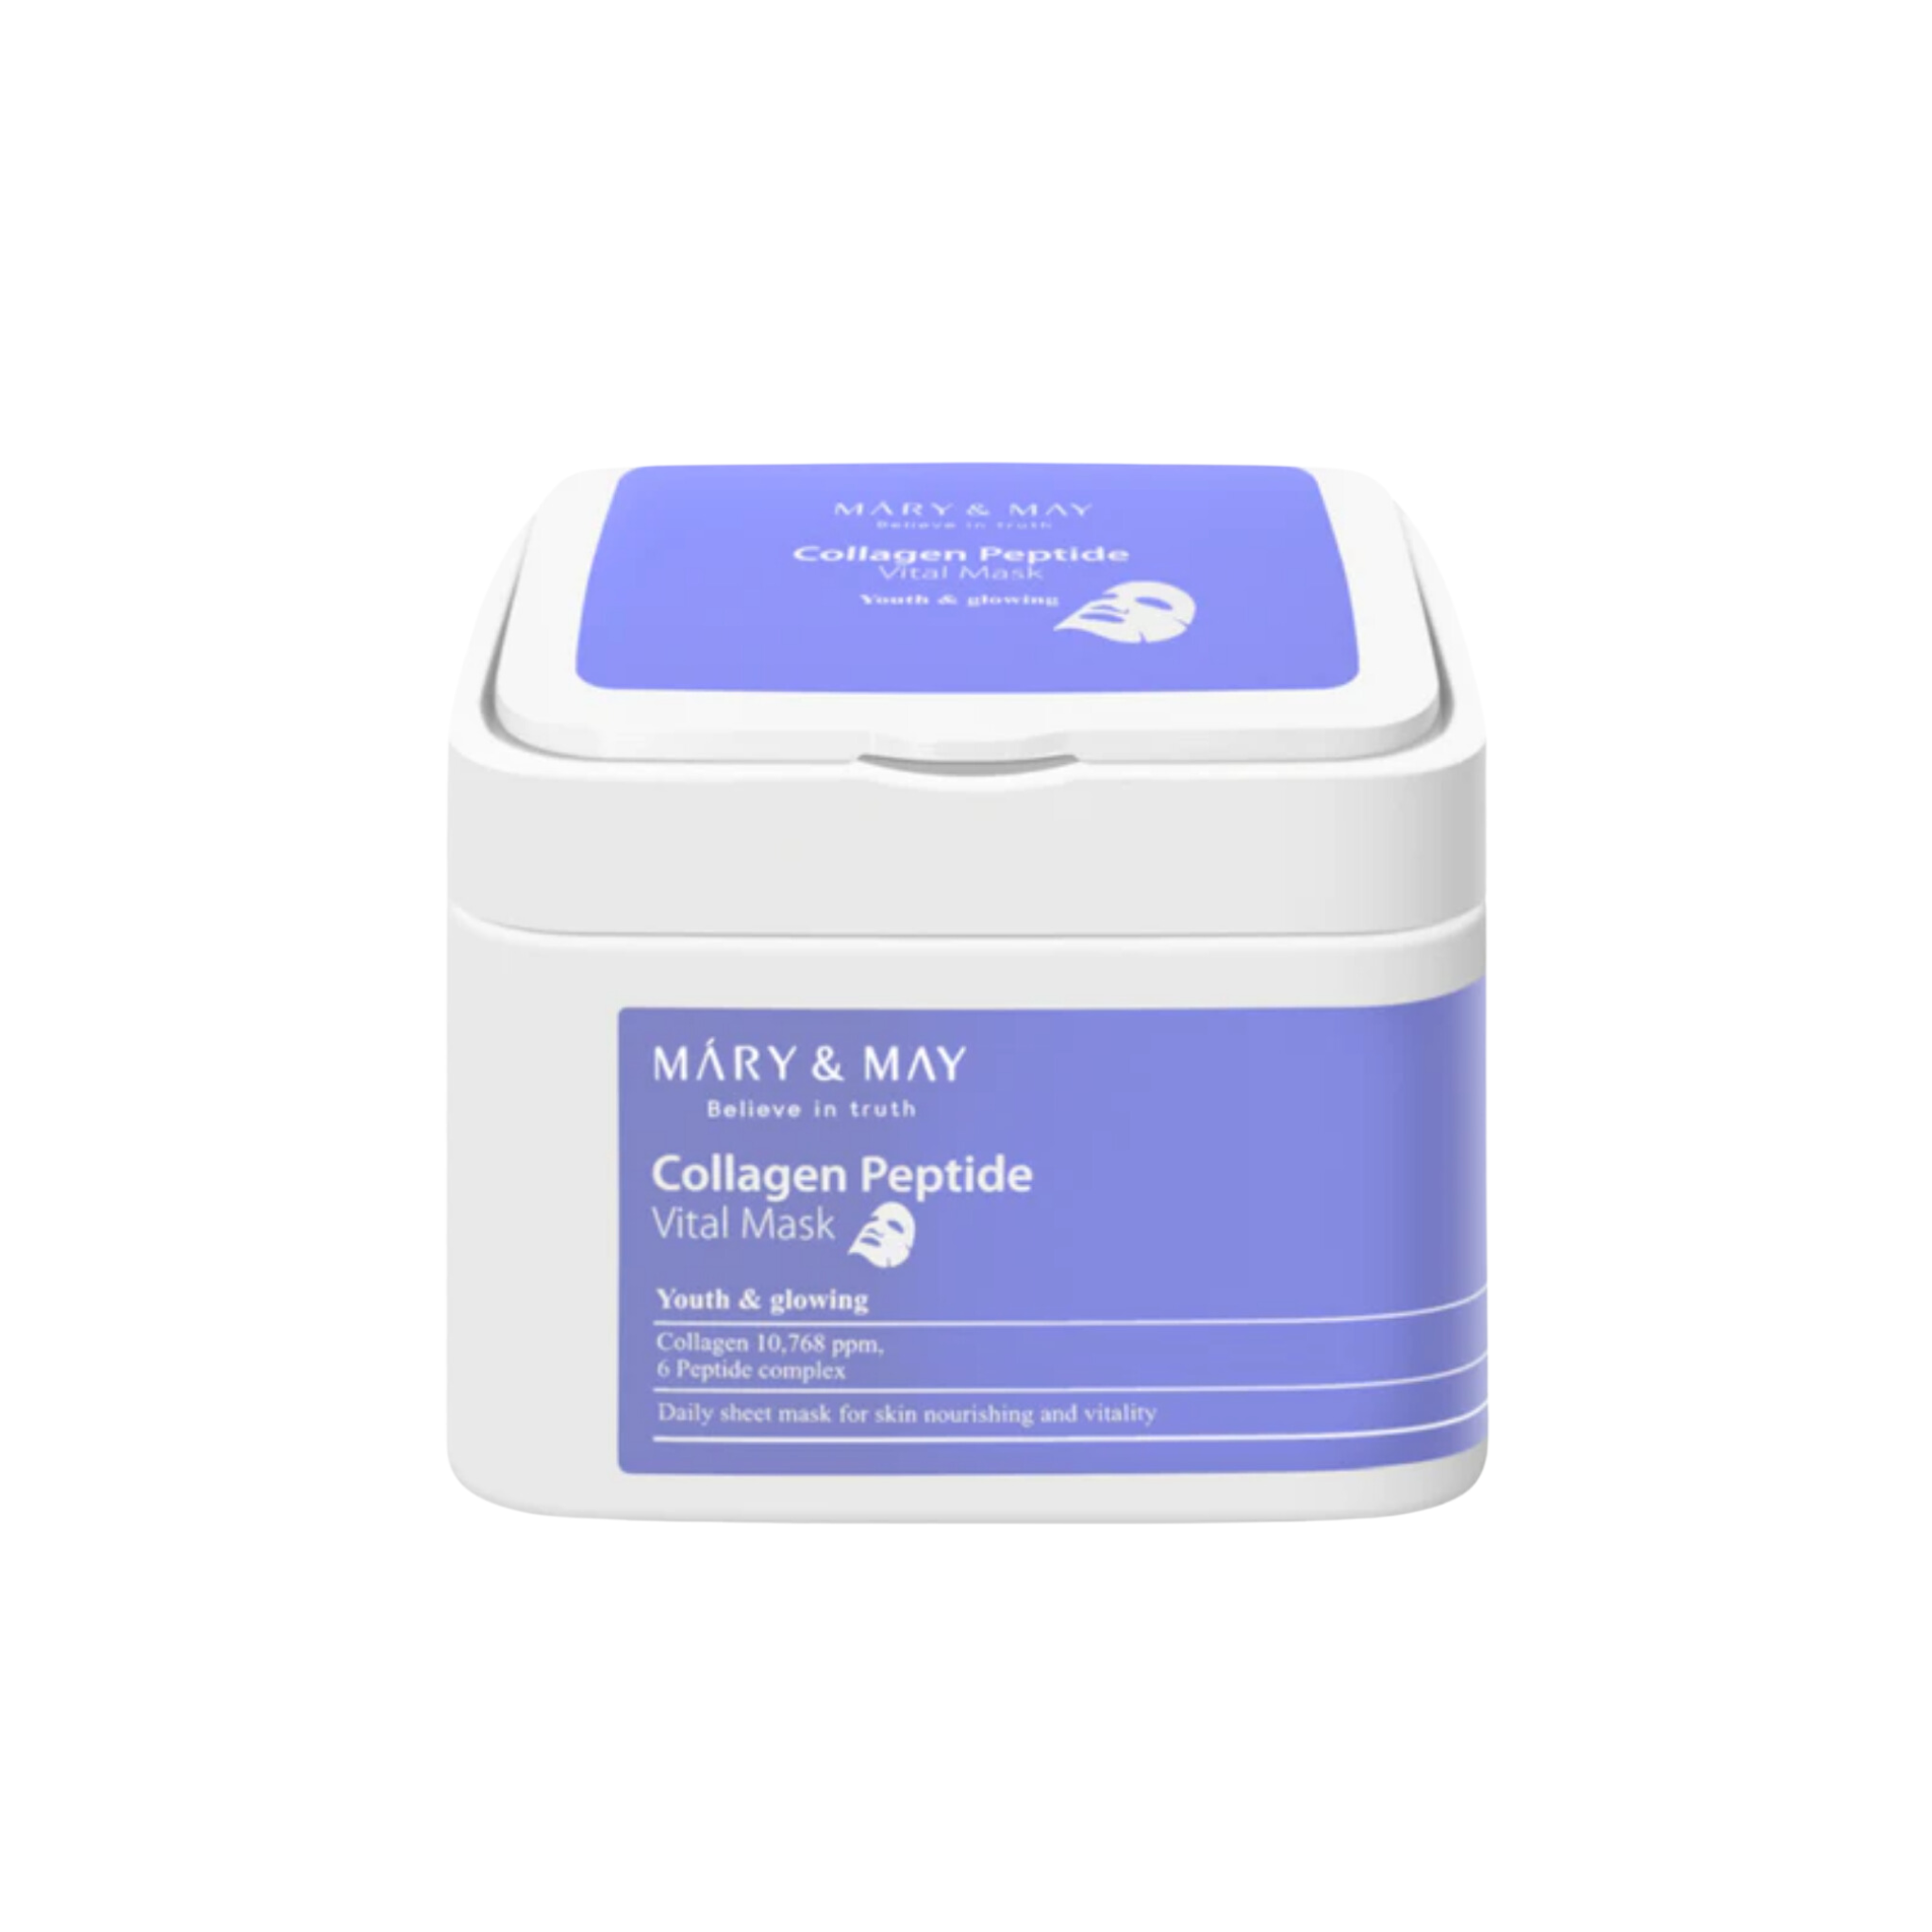 MARY & MAY Collagen Peptide Vital Mask (30pcs) 